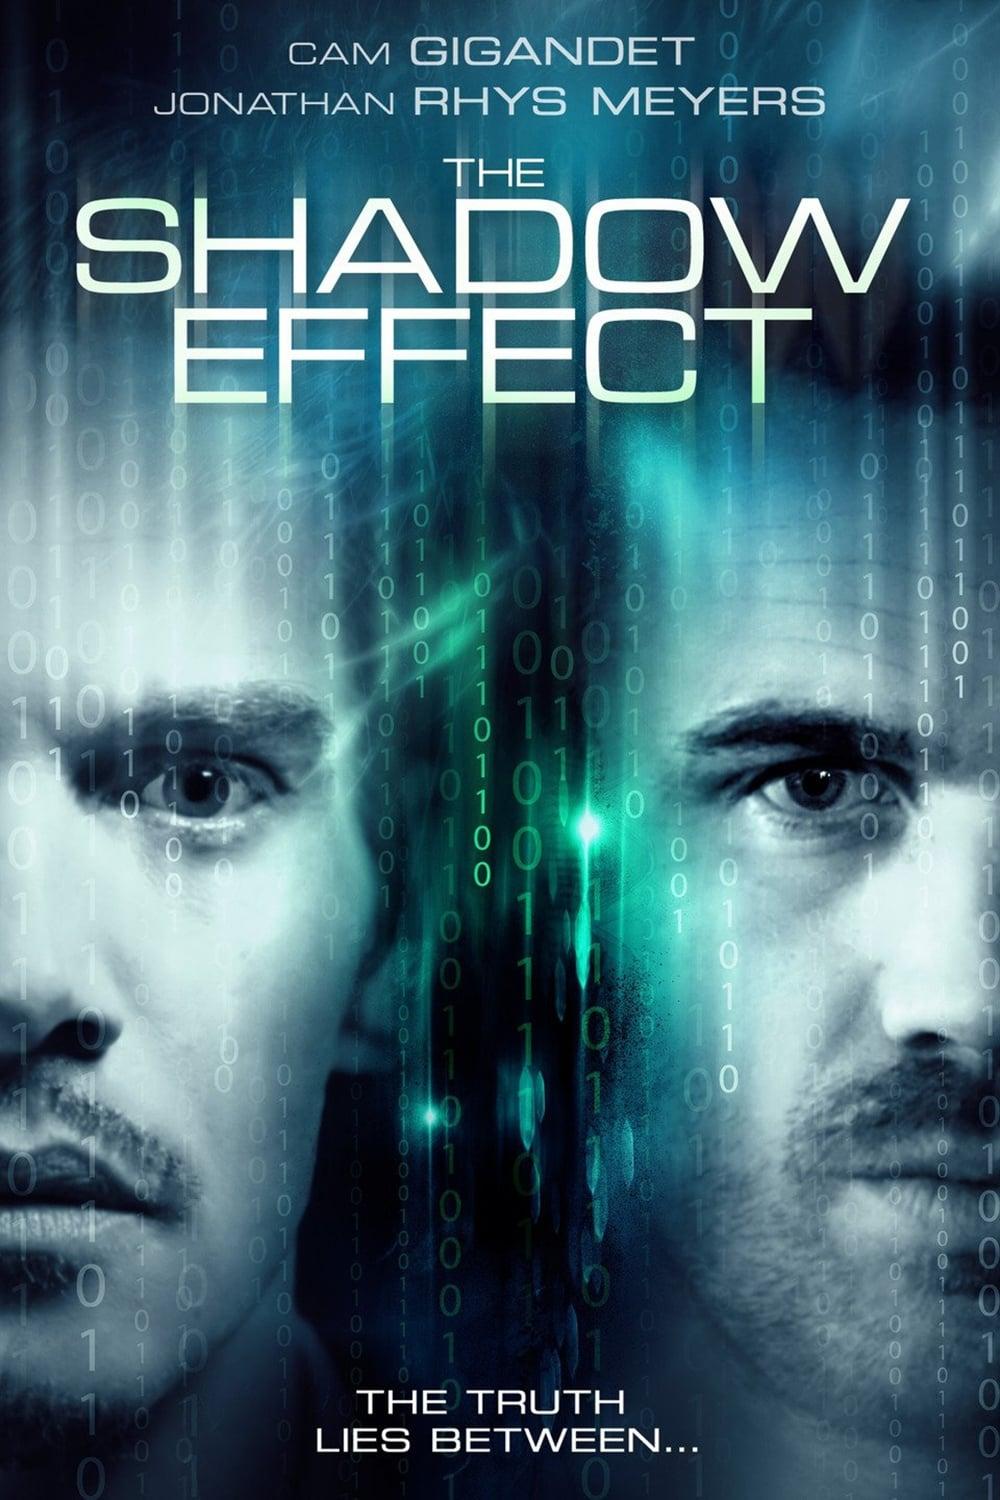 The Shadow Effect poster